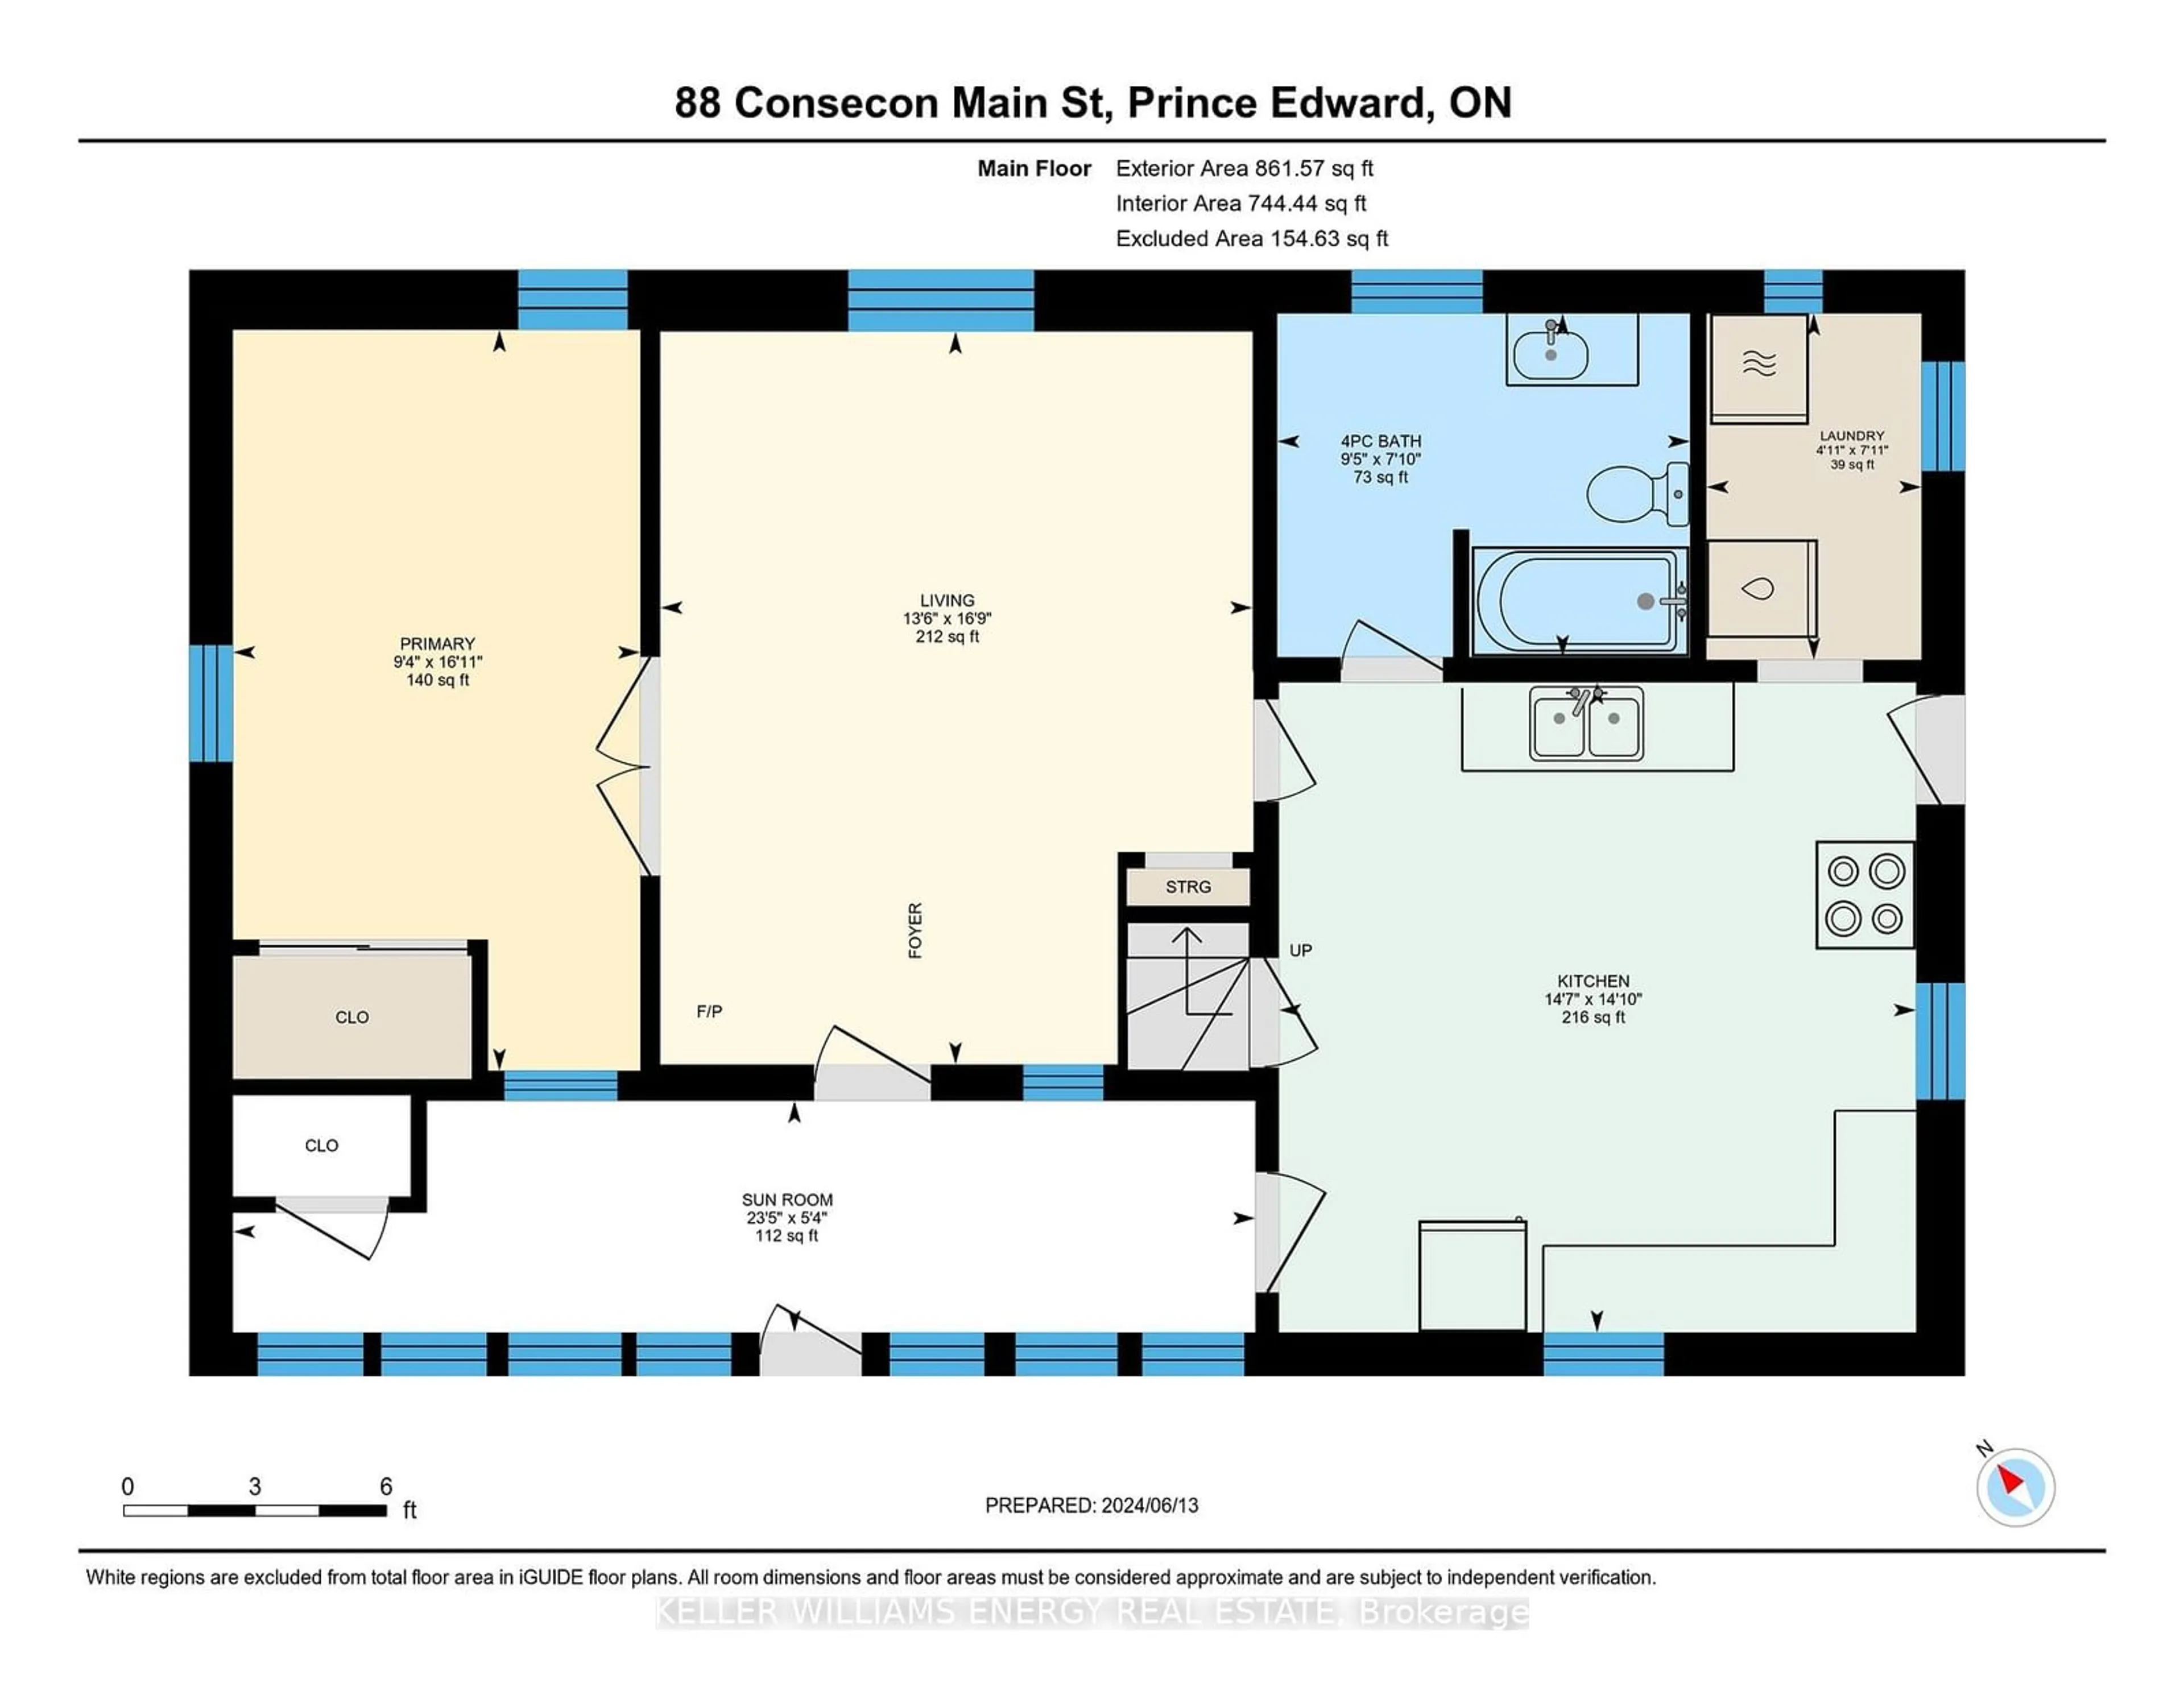 Floor plan for 88 Consecon Main St, Prince Edward County Ontario K0K 1T0